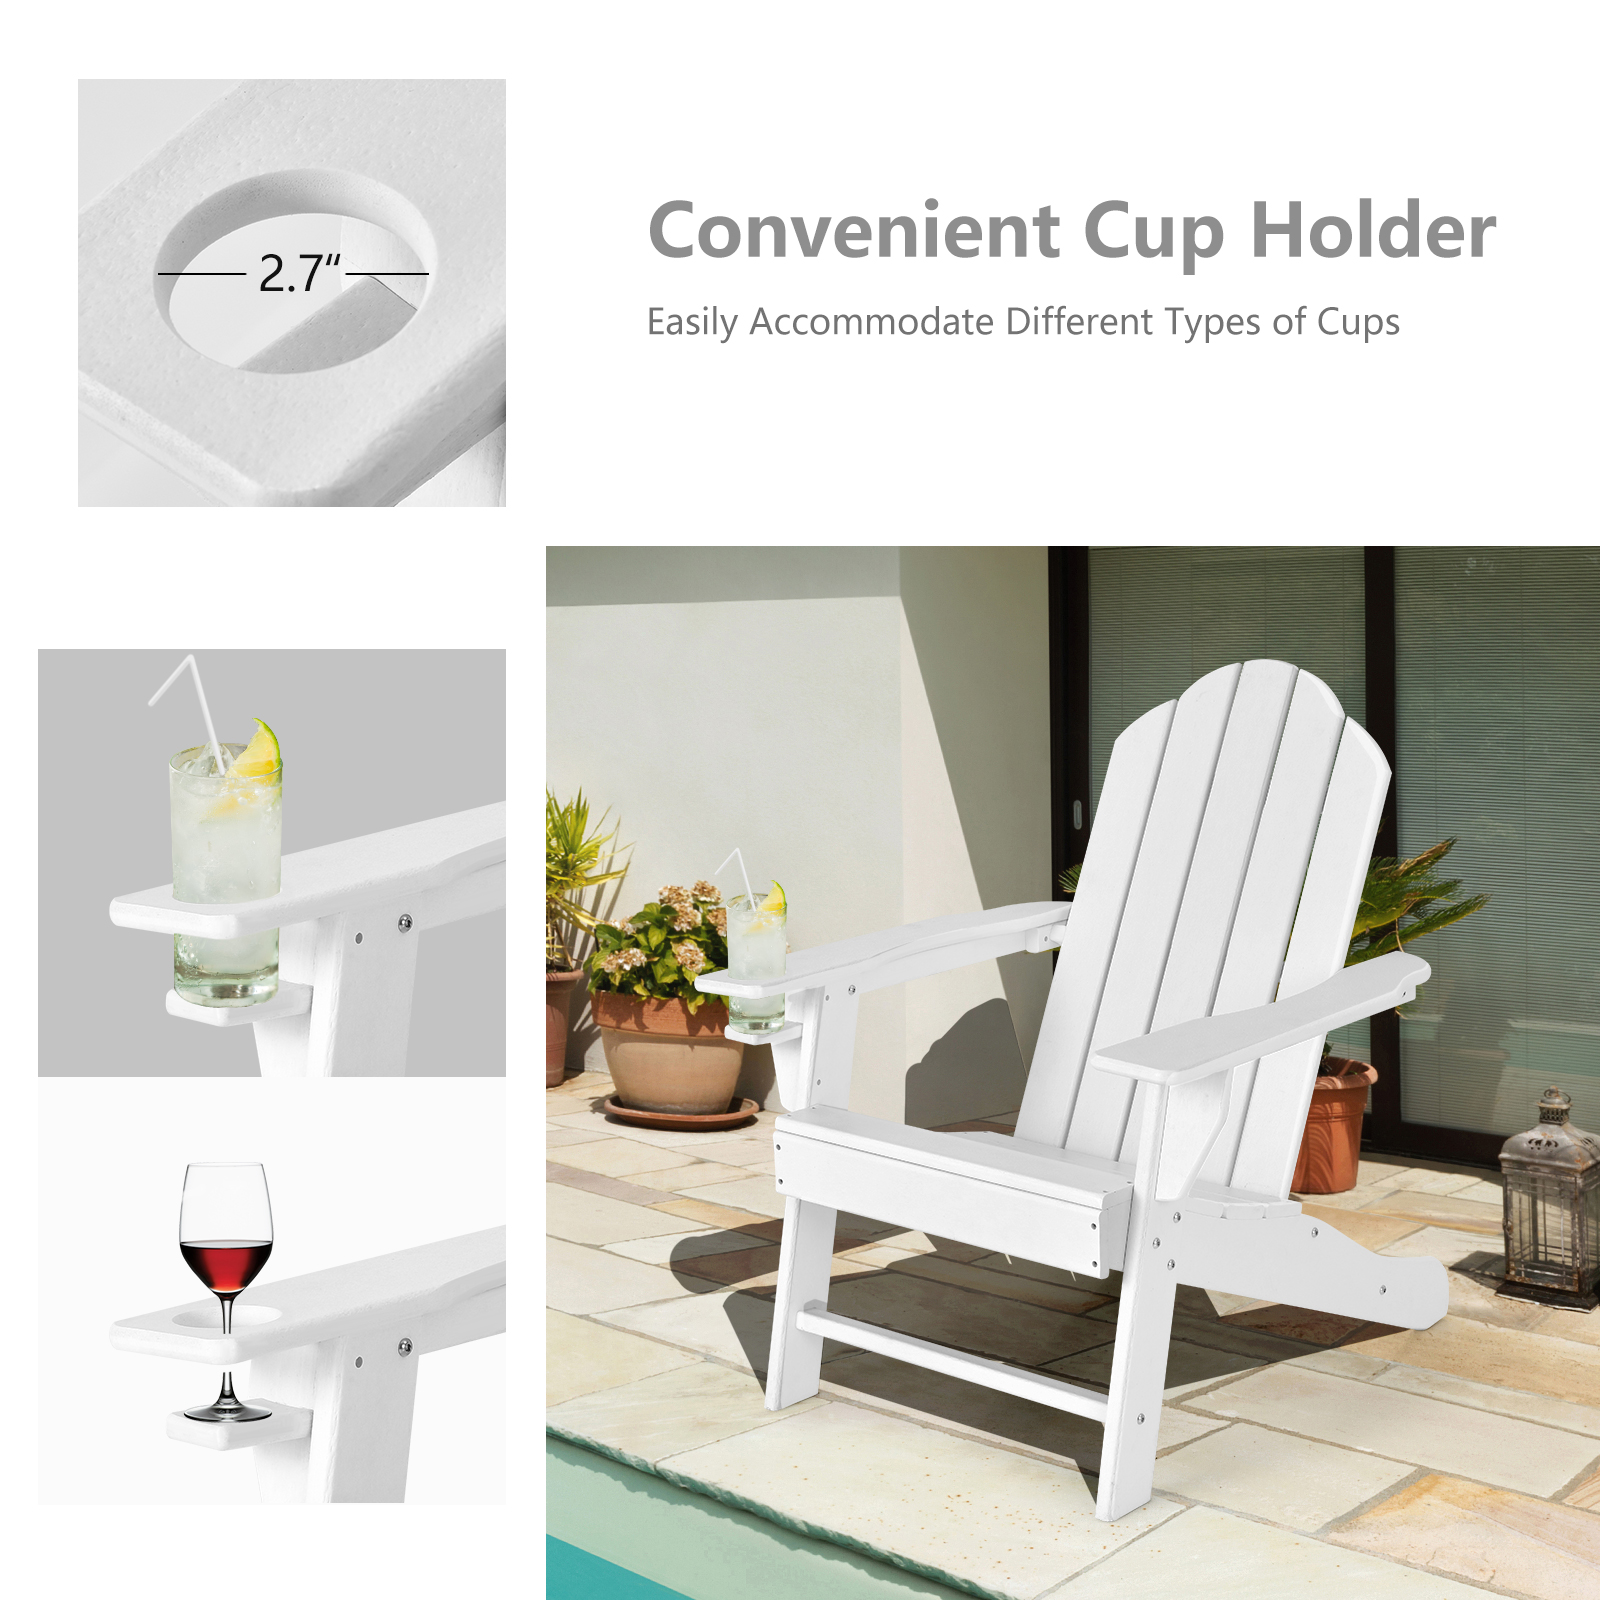 Patiojoy Patio 2PCS Adirondack Chair Side Table Set Outdoor Chair Set with End Table Weather Resistant Cup Holder for Backyard Garden White - image 5 of 8